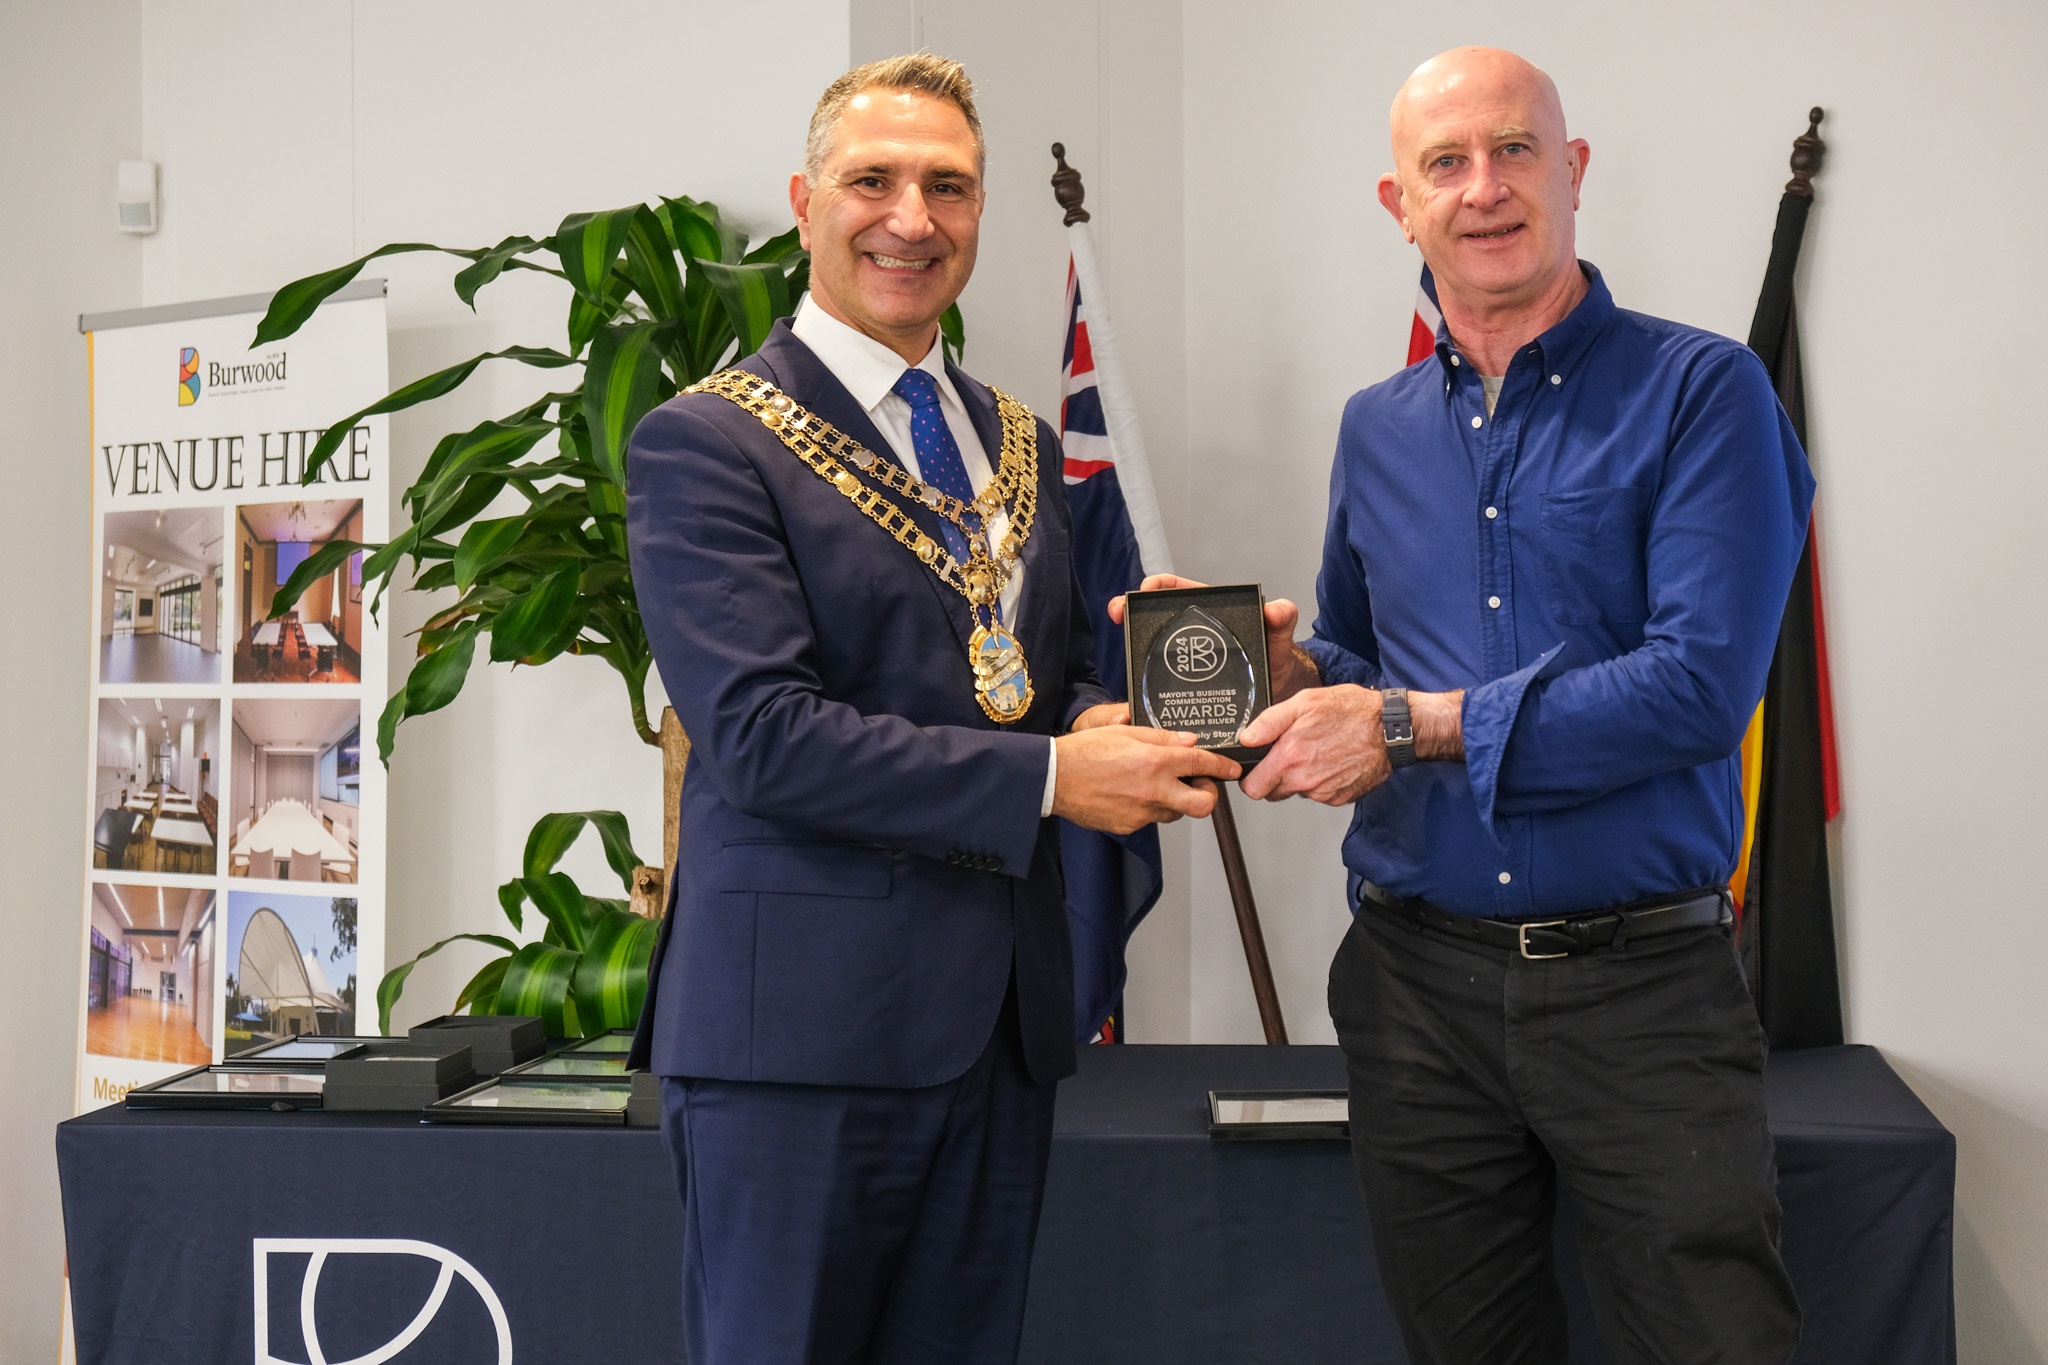 image of owner accepting award from the mayor